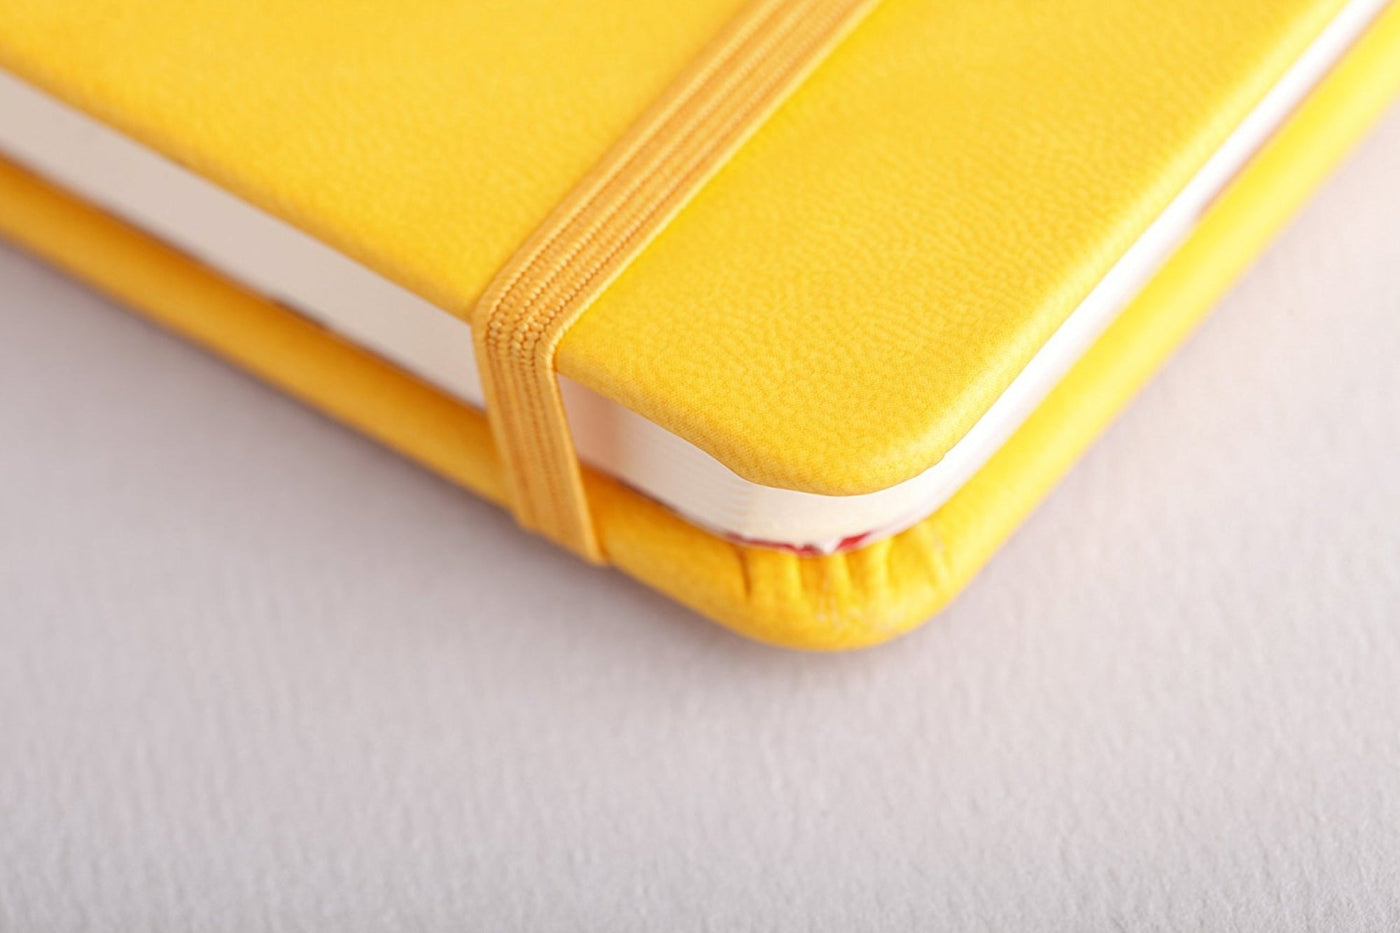 Rhodia Rhodiarama Soft Cover A5 Yellow Dotted Notebook Elastic Band